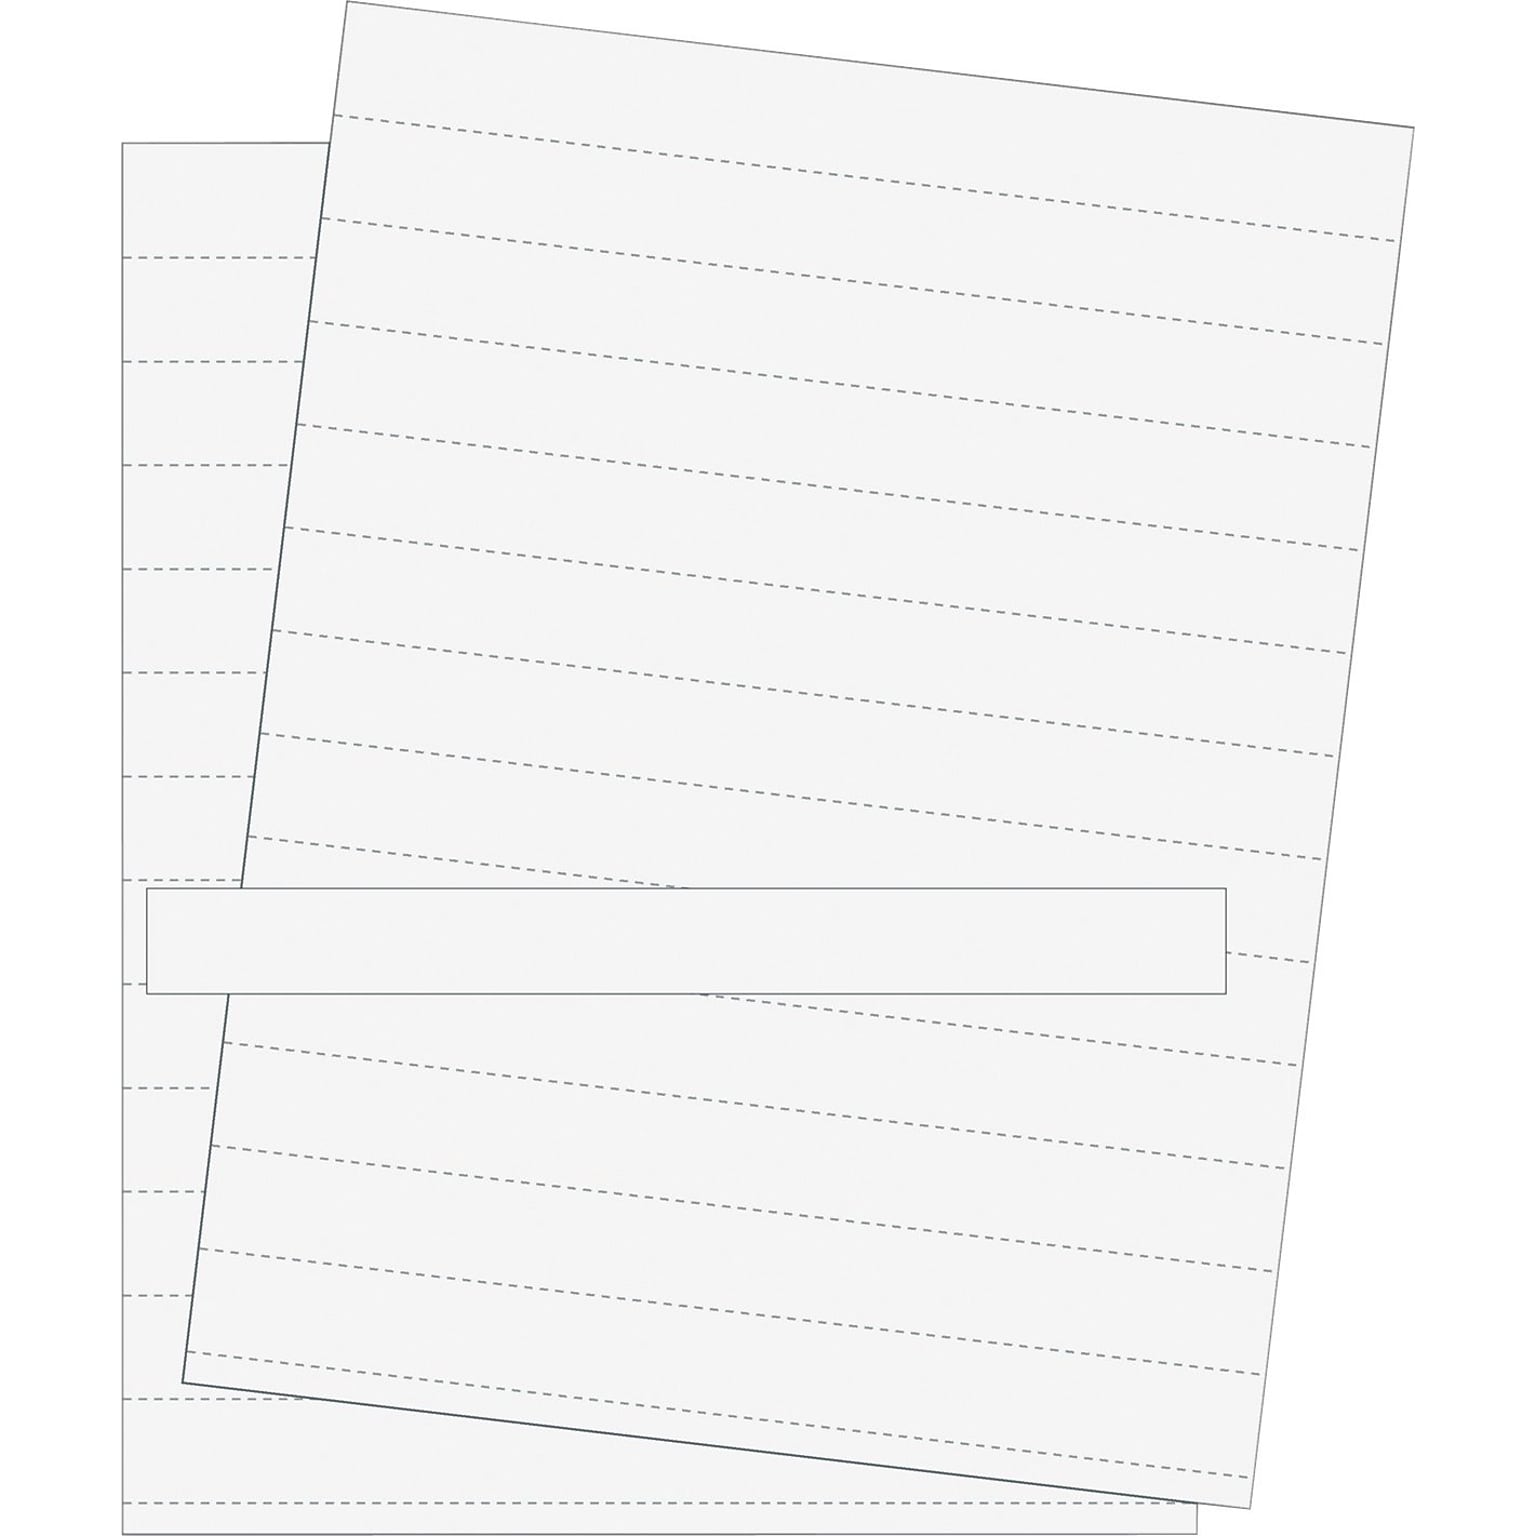 MasterVision® Data Card Replacement Sheet, White, 10/Pack